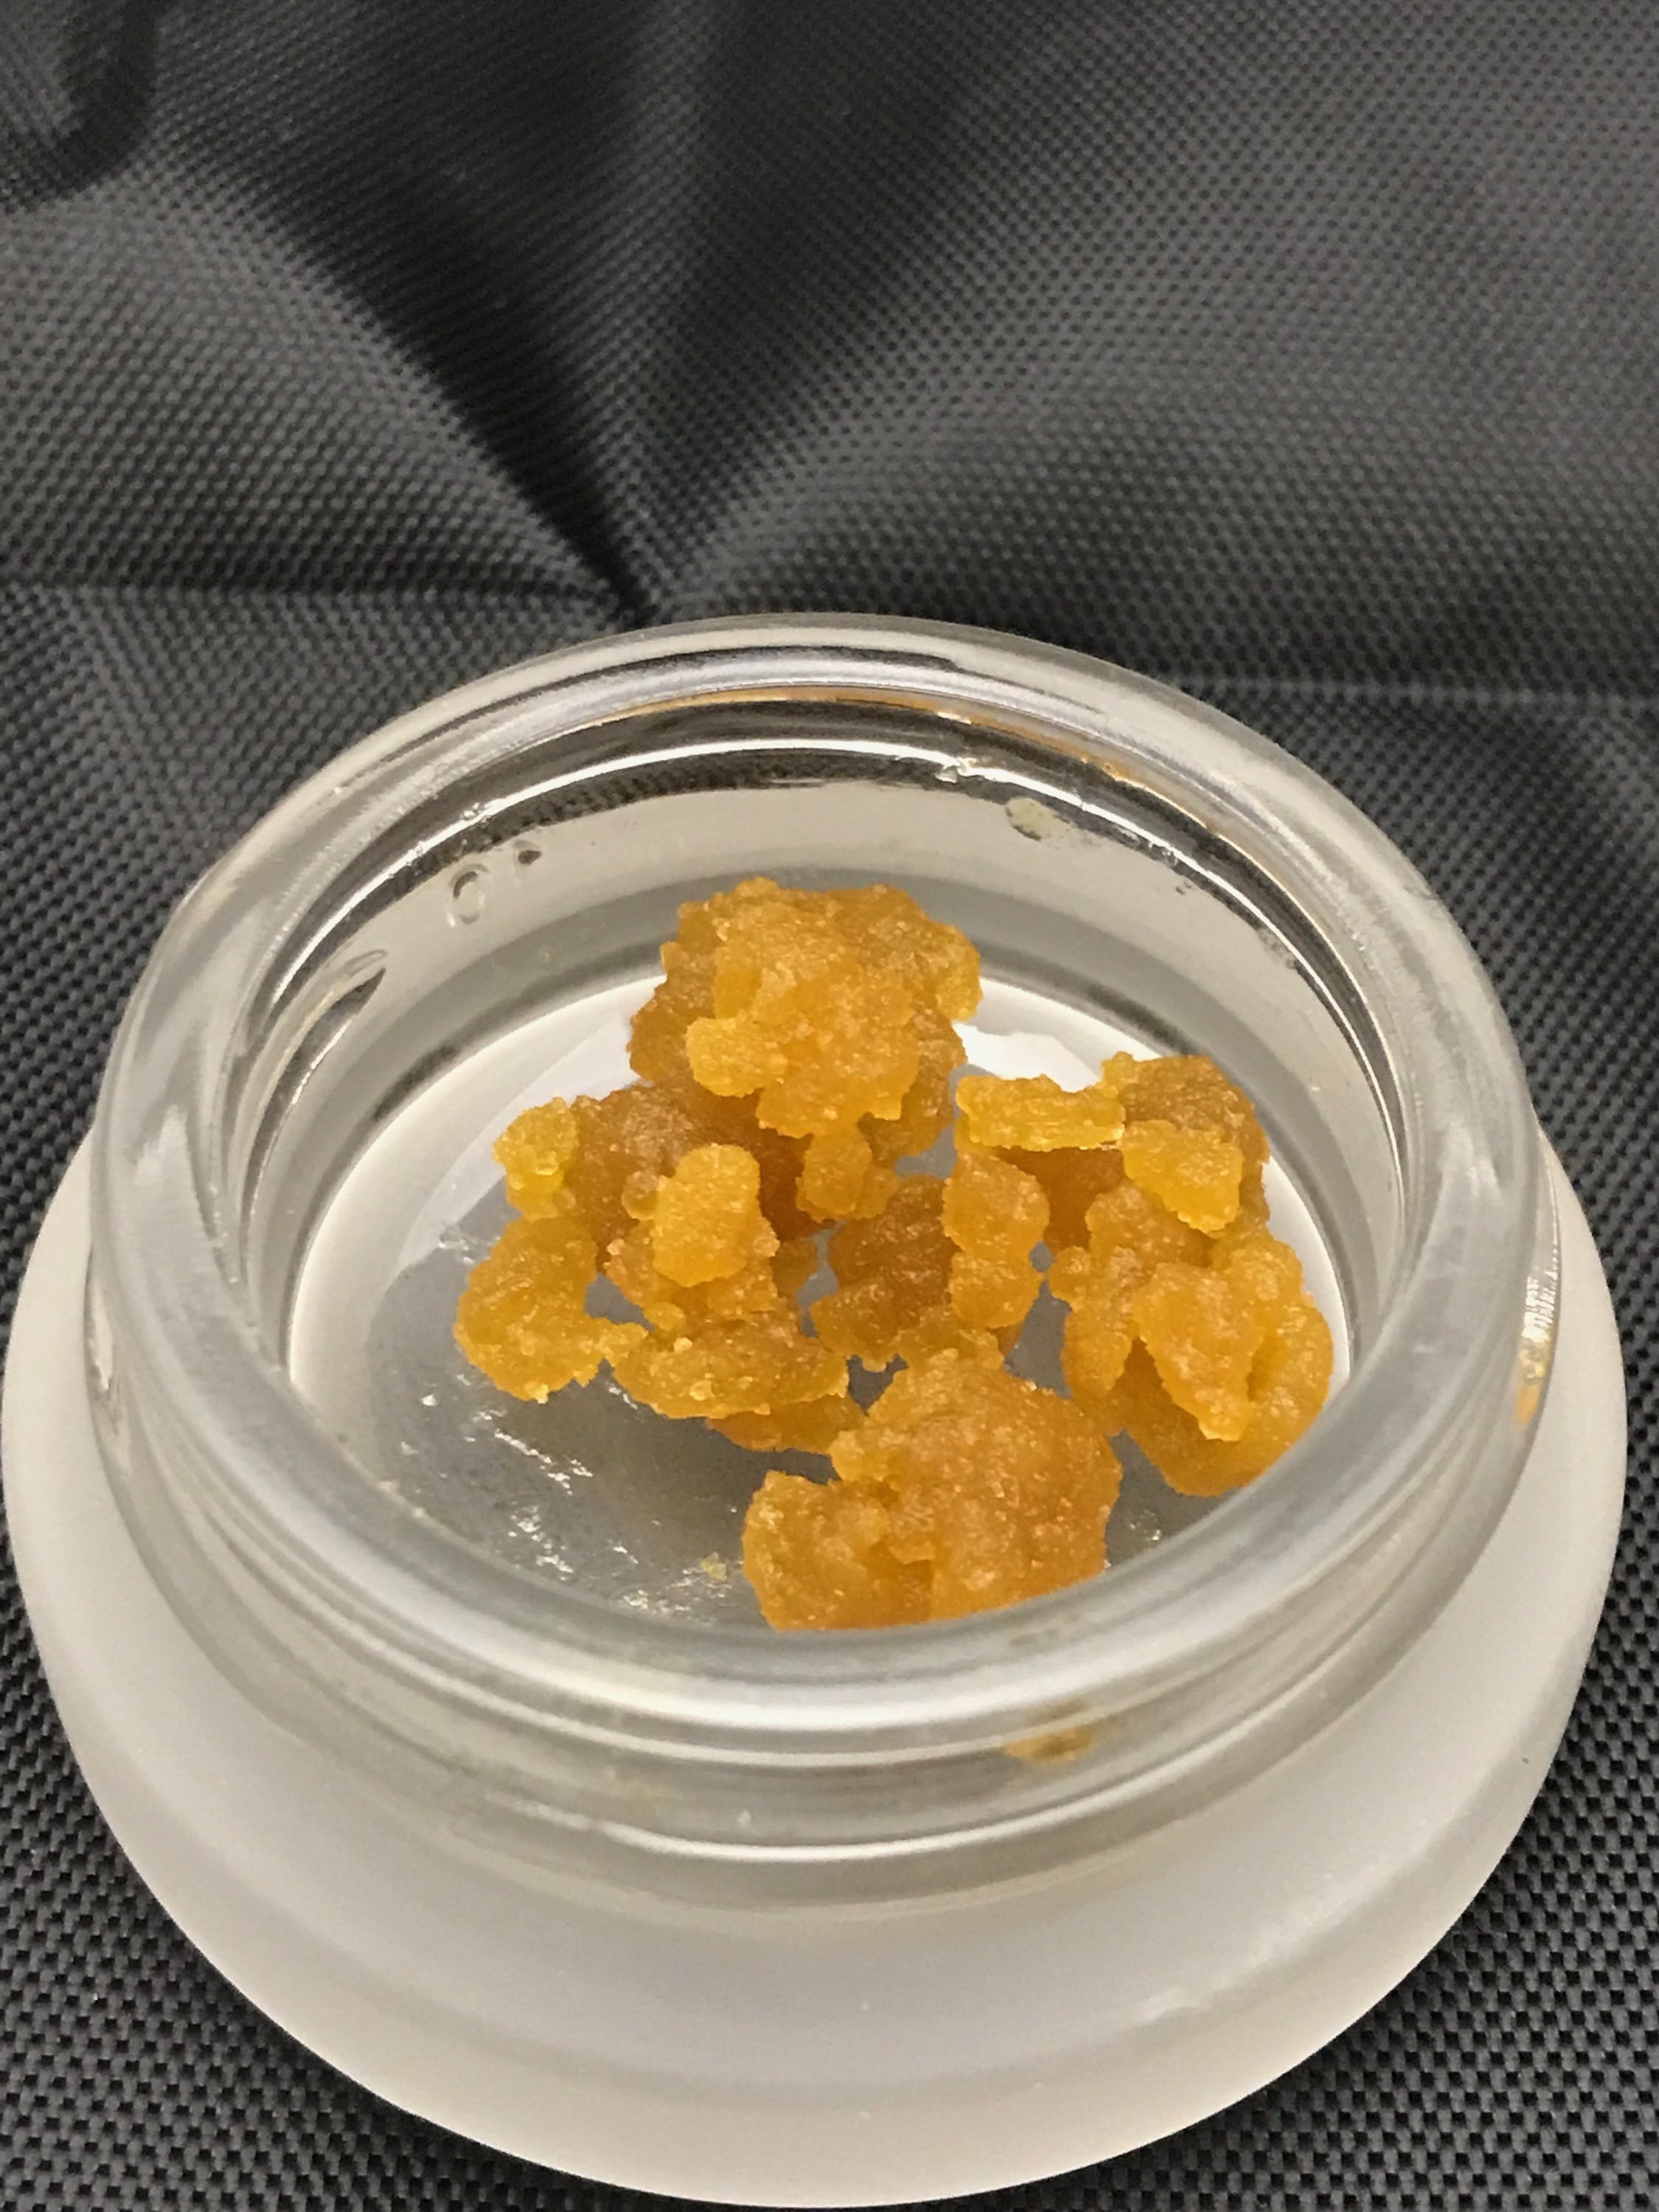 concentrate-infinite-sugar-wax-commerce-city-kush